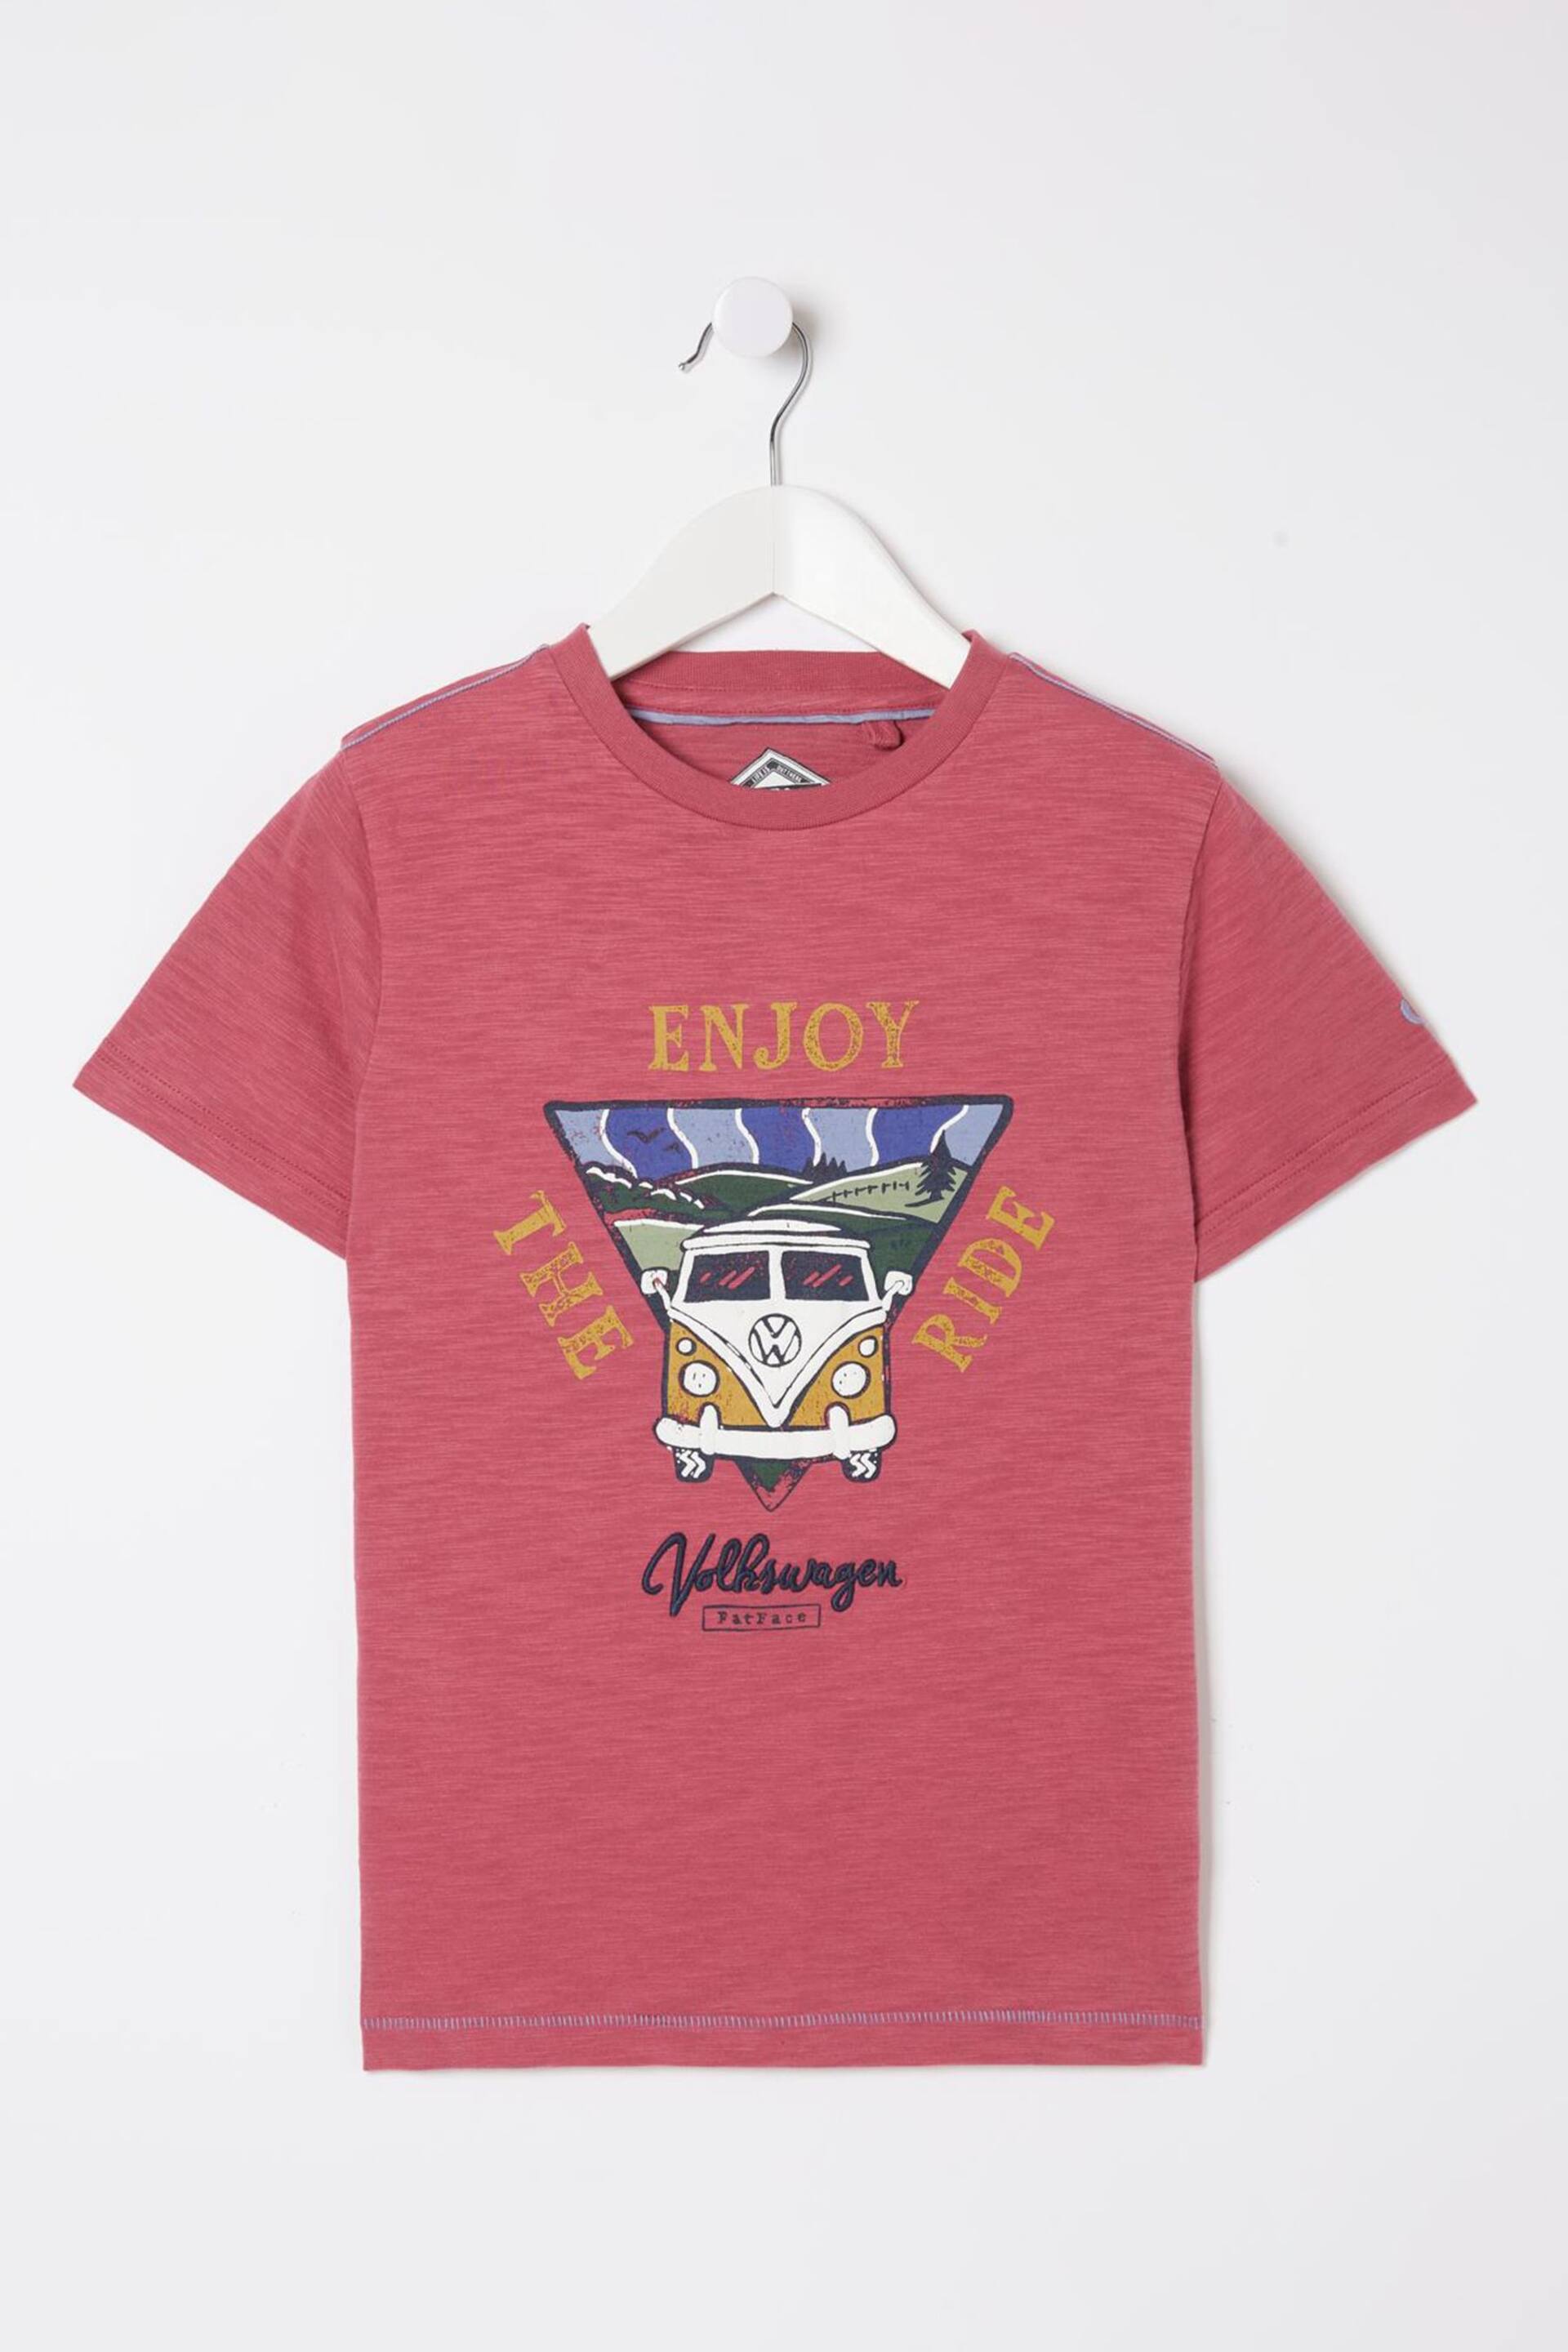 FatFace Pink VW Graphic Jersey T-Shirt - Image 1 of 1